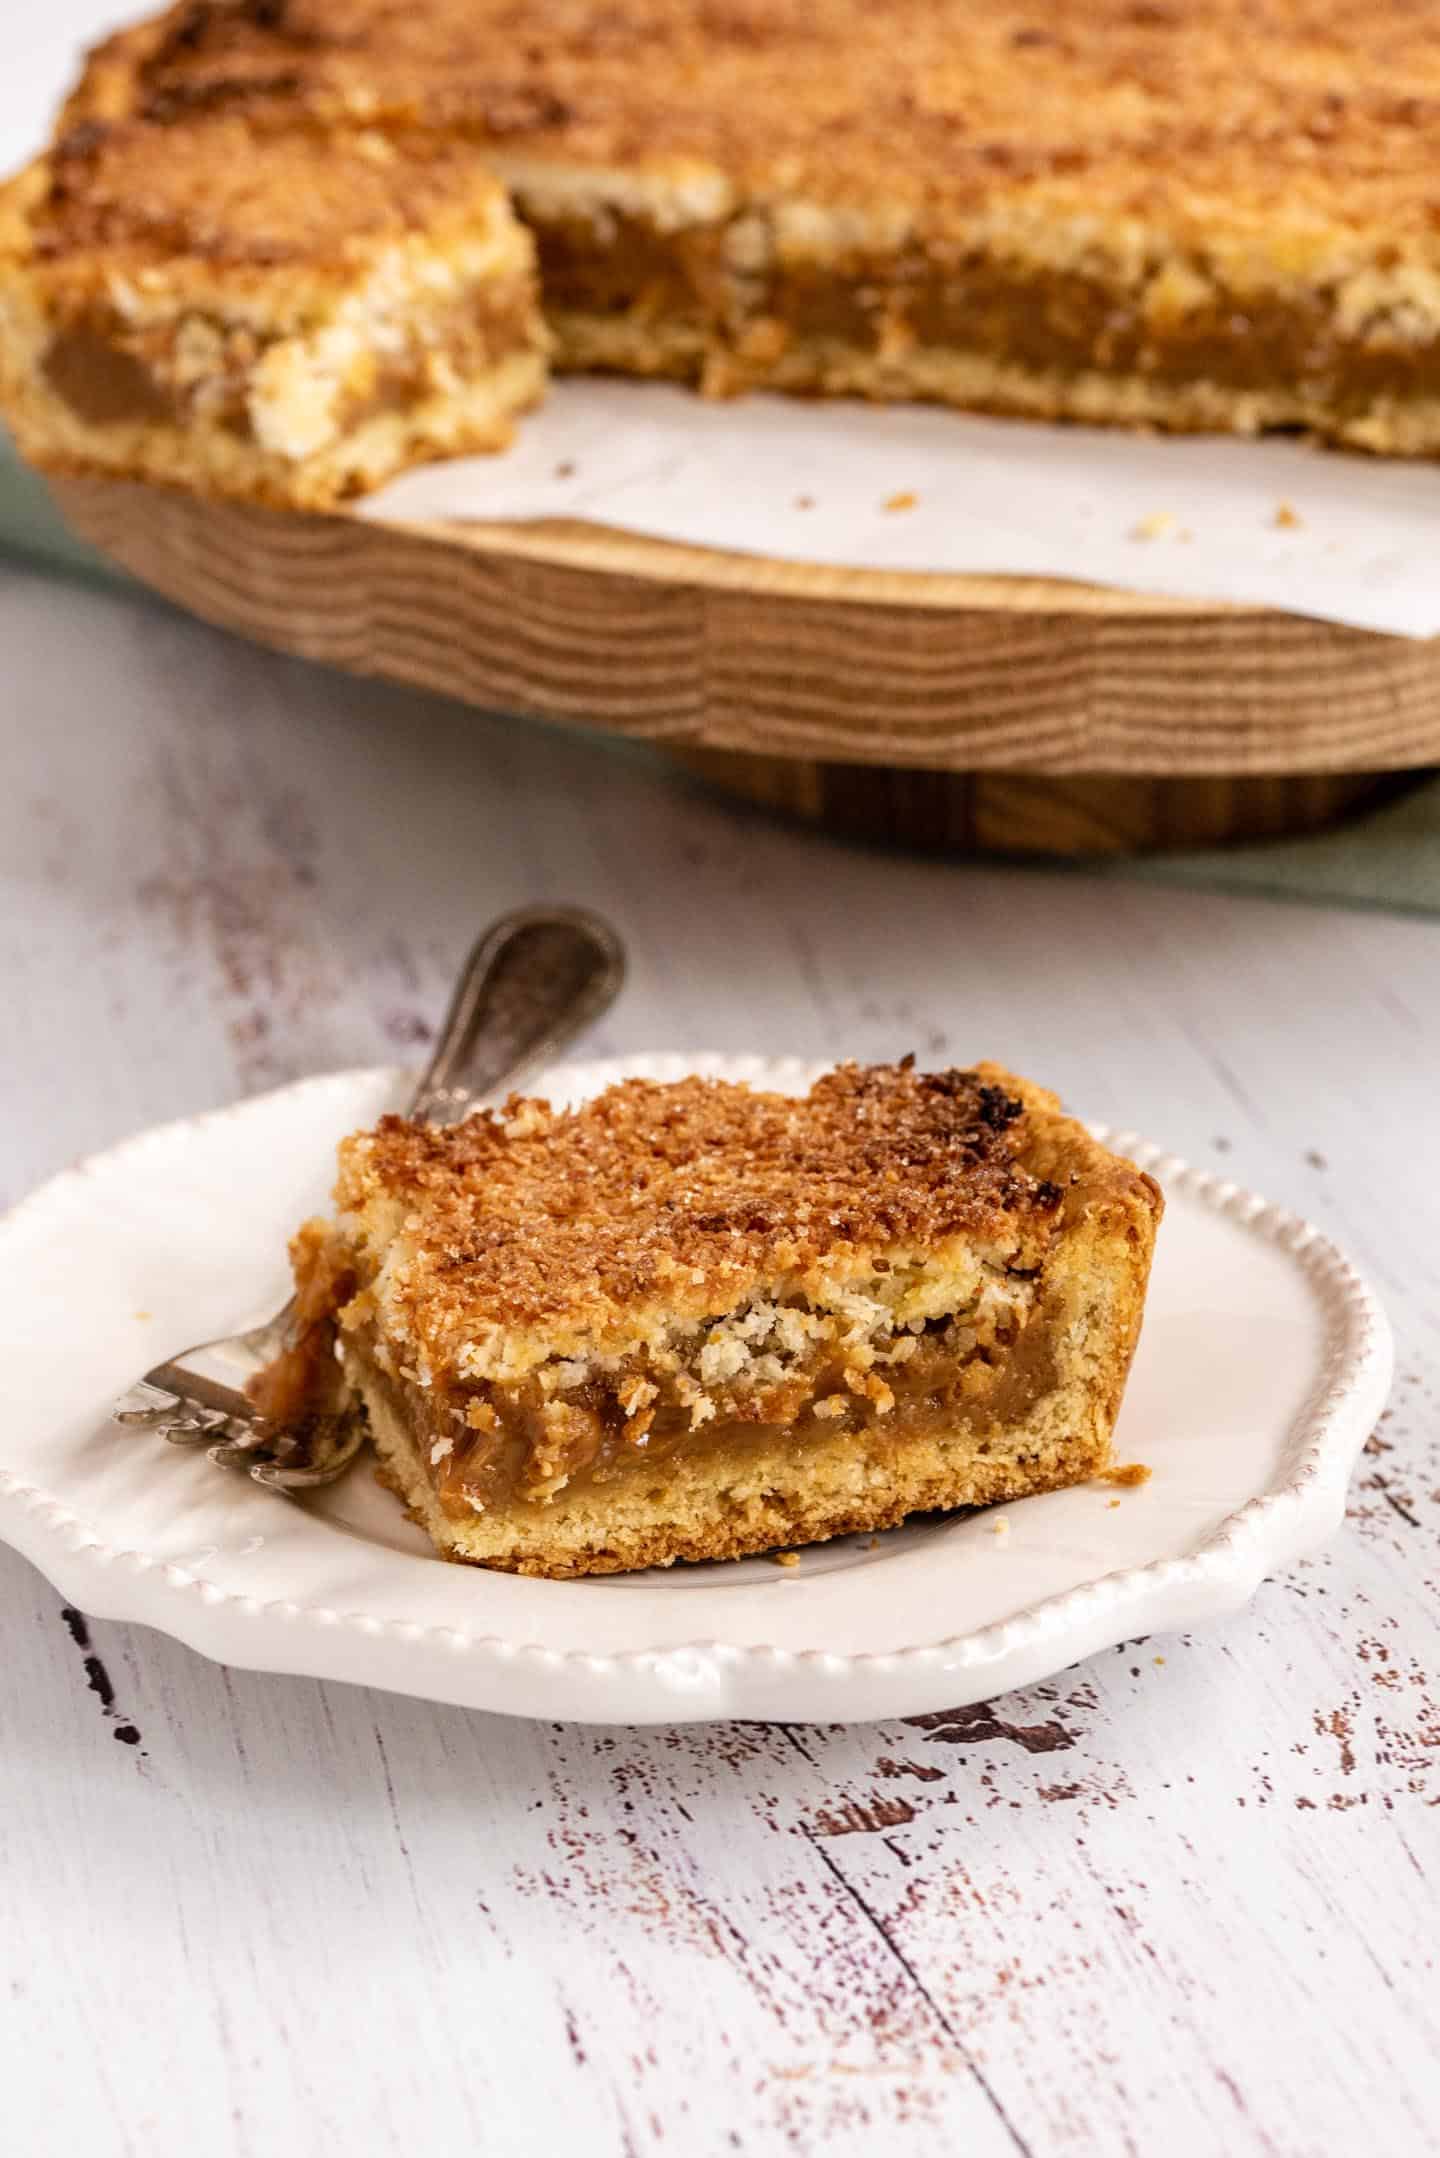 This Coconut and Dulce de Leche Tart is one of my favorites and an absolute Argentine classic. Very moist, sweet and with a citric touch, it’s the perfect option for any occasion.